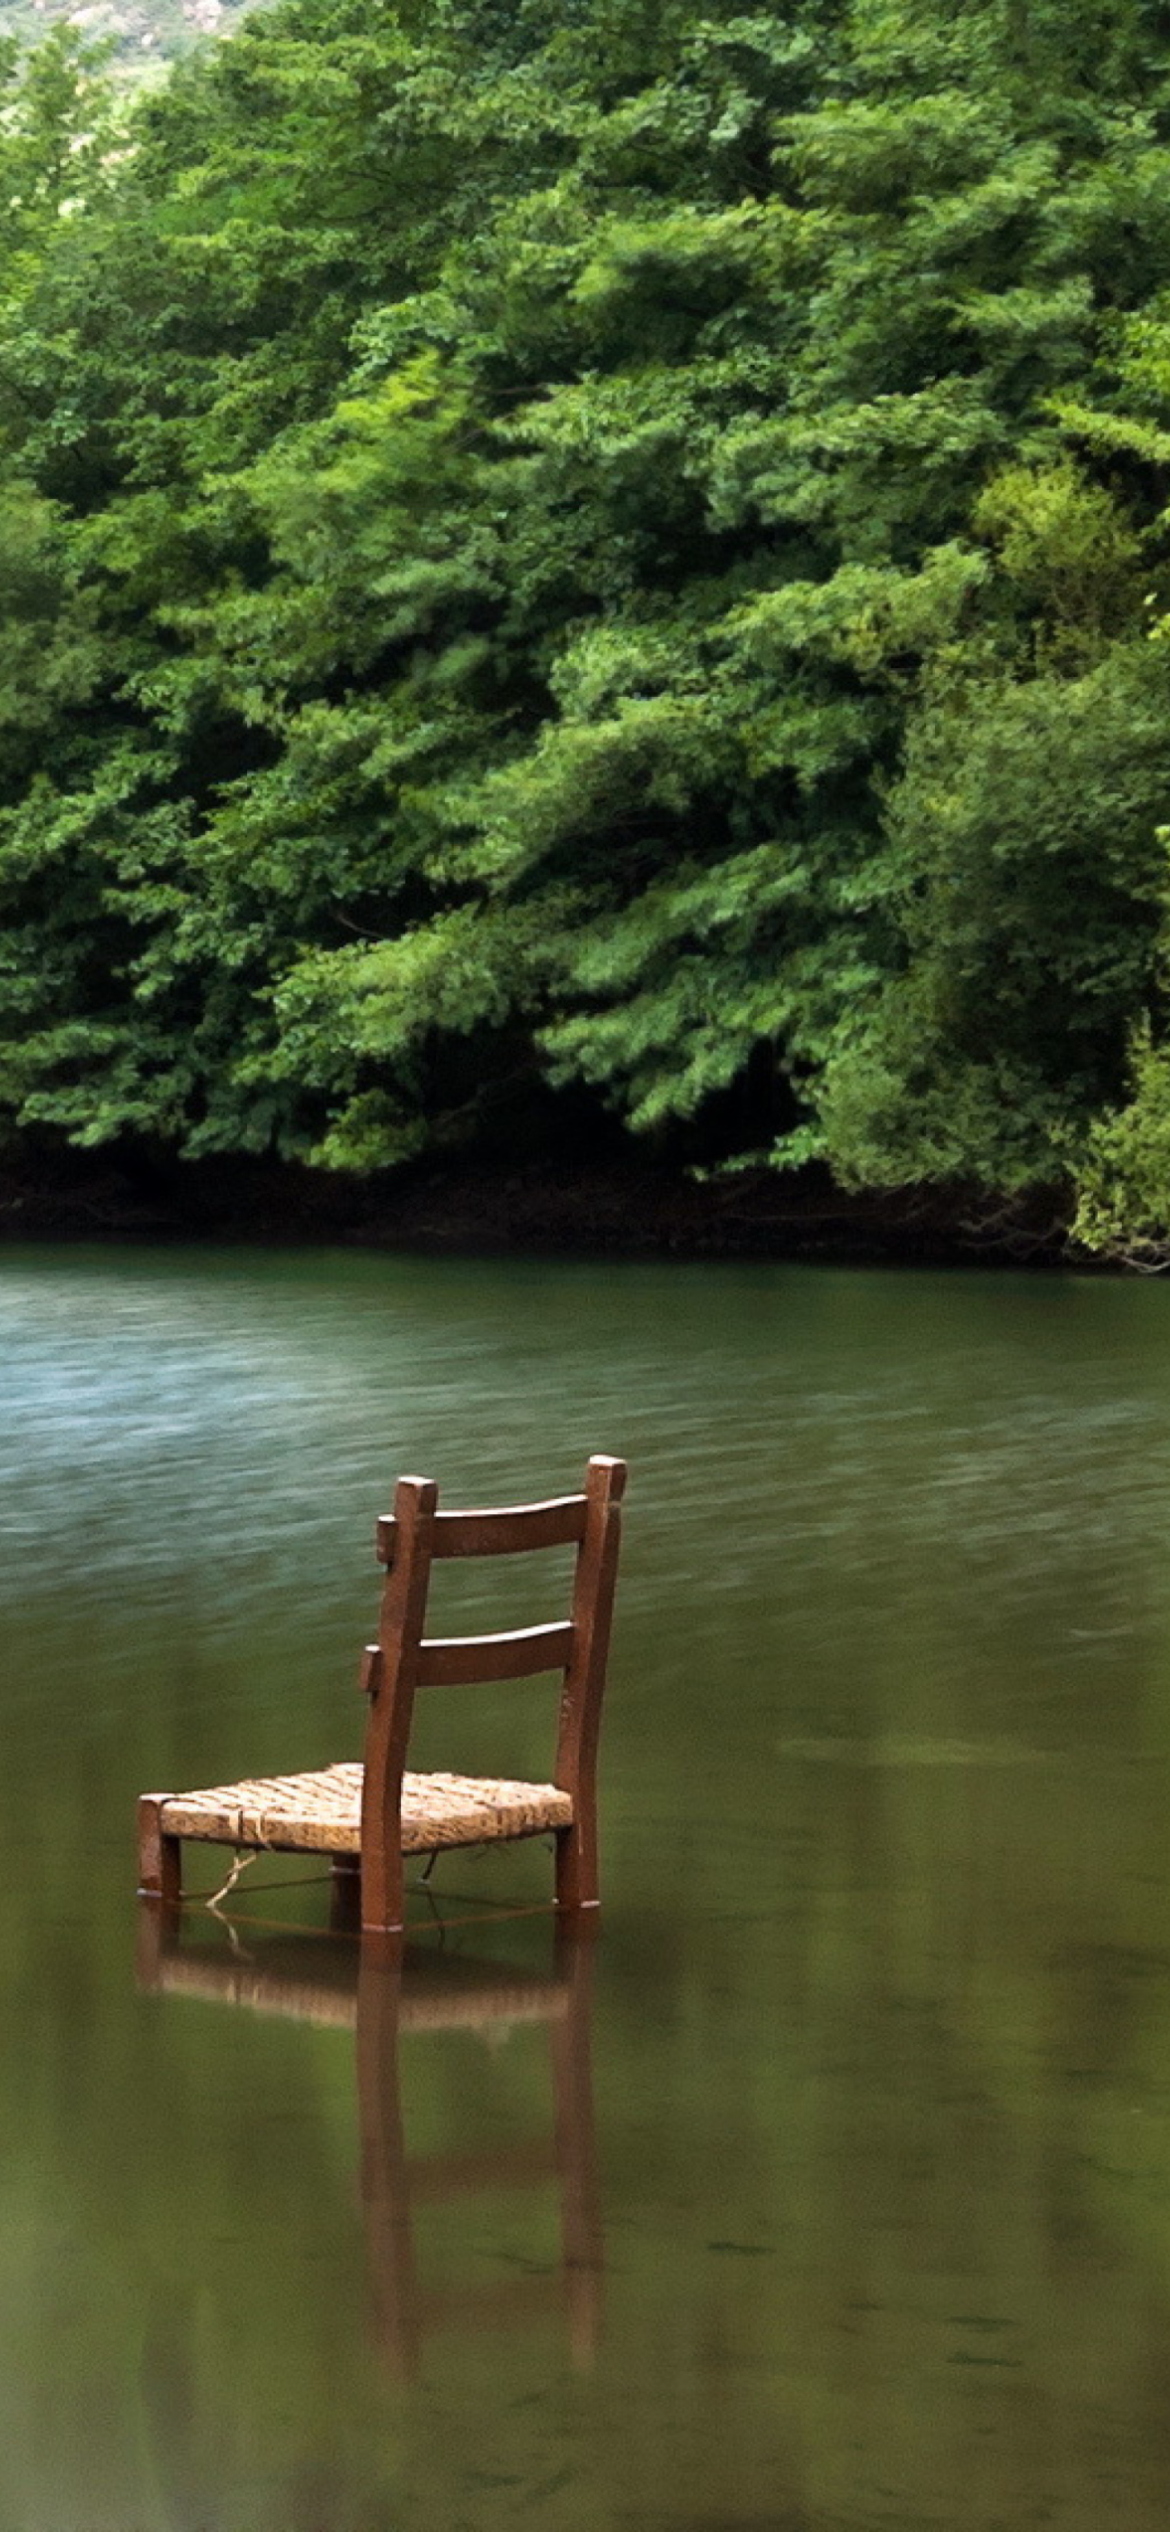 Chair In Middle Of Pieceful Lake screenshot #1 1170x2532